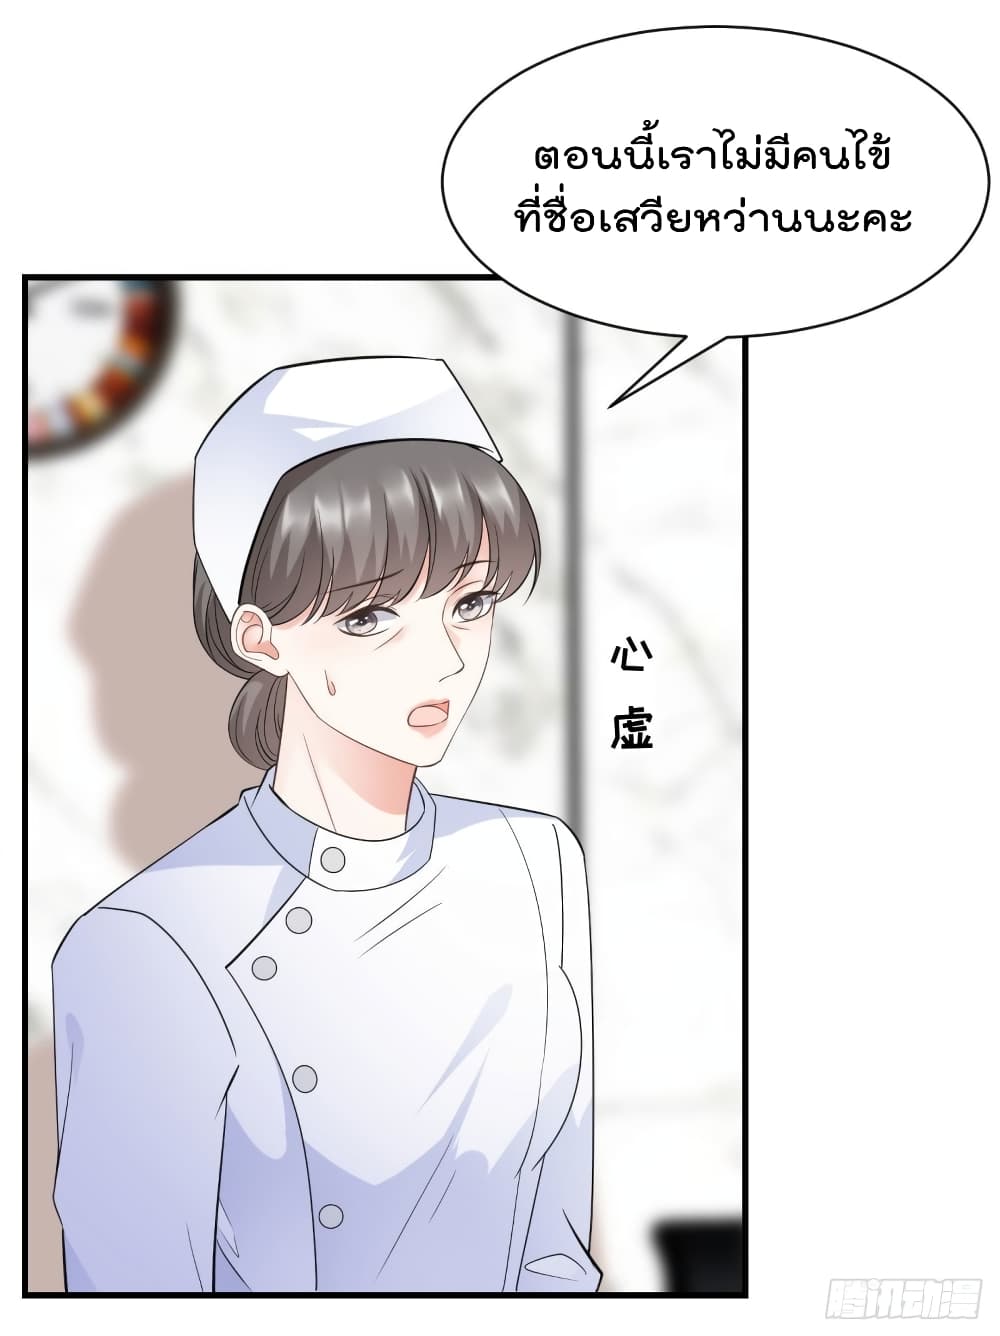 What Can the Eldest Lady Have คุณหนูใหญ่ ทำไมคุณร้ายอย่างนี้ 26-26